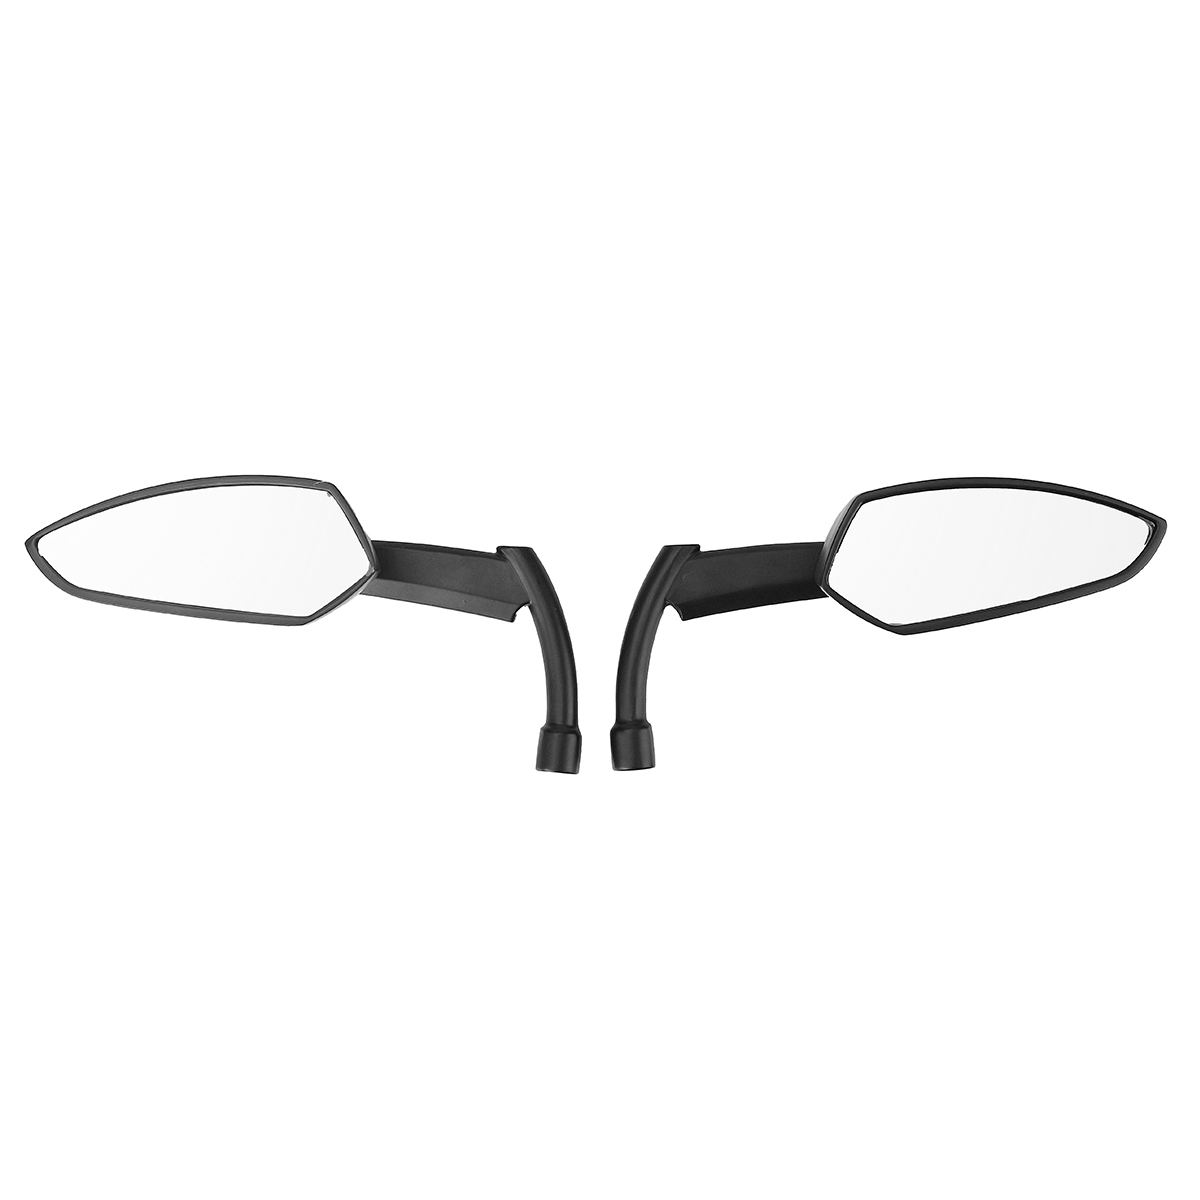 8MM 10MM Black CNC Blade Rear Review Mirrors for Harley Dyna Heritage Softail Sportster